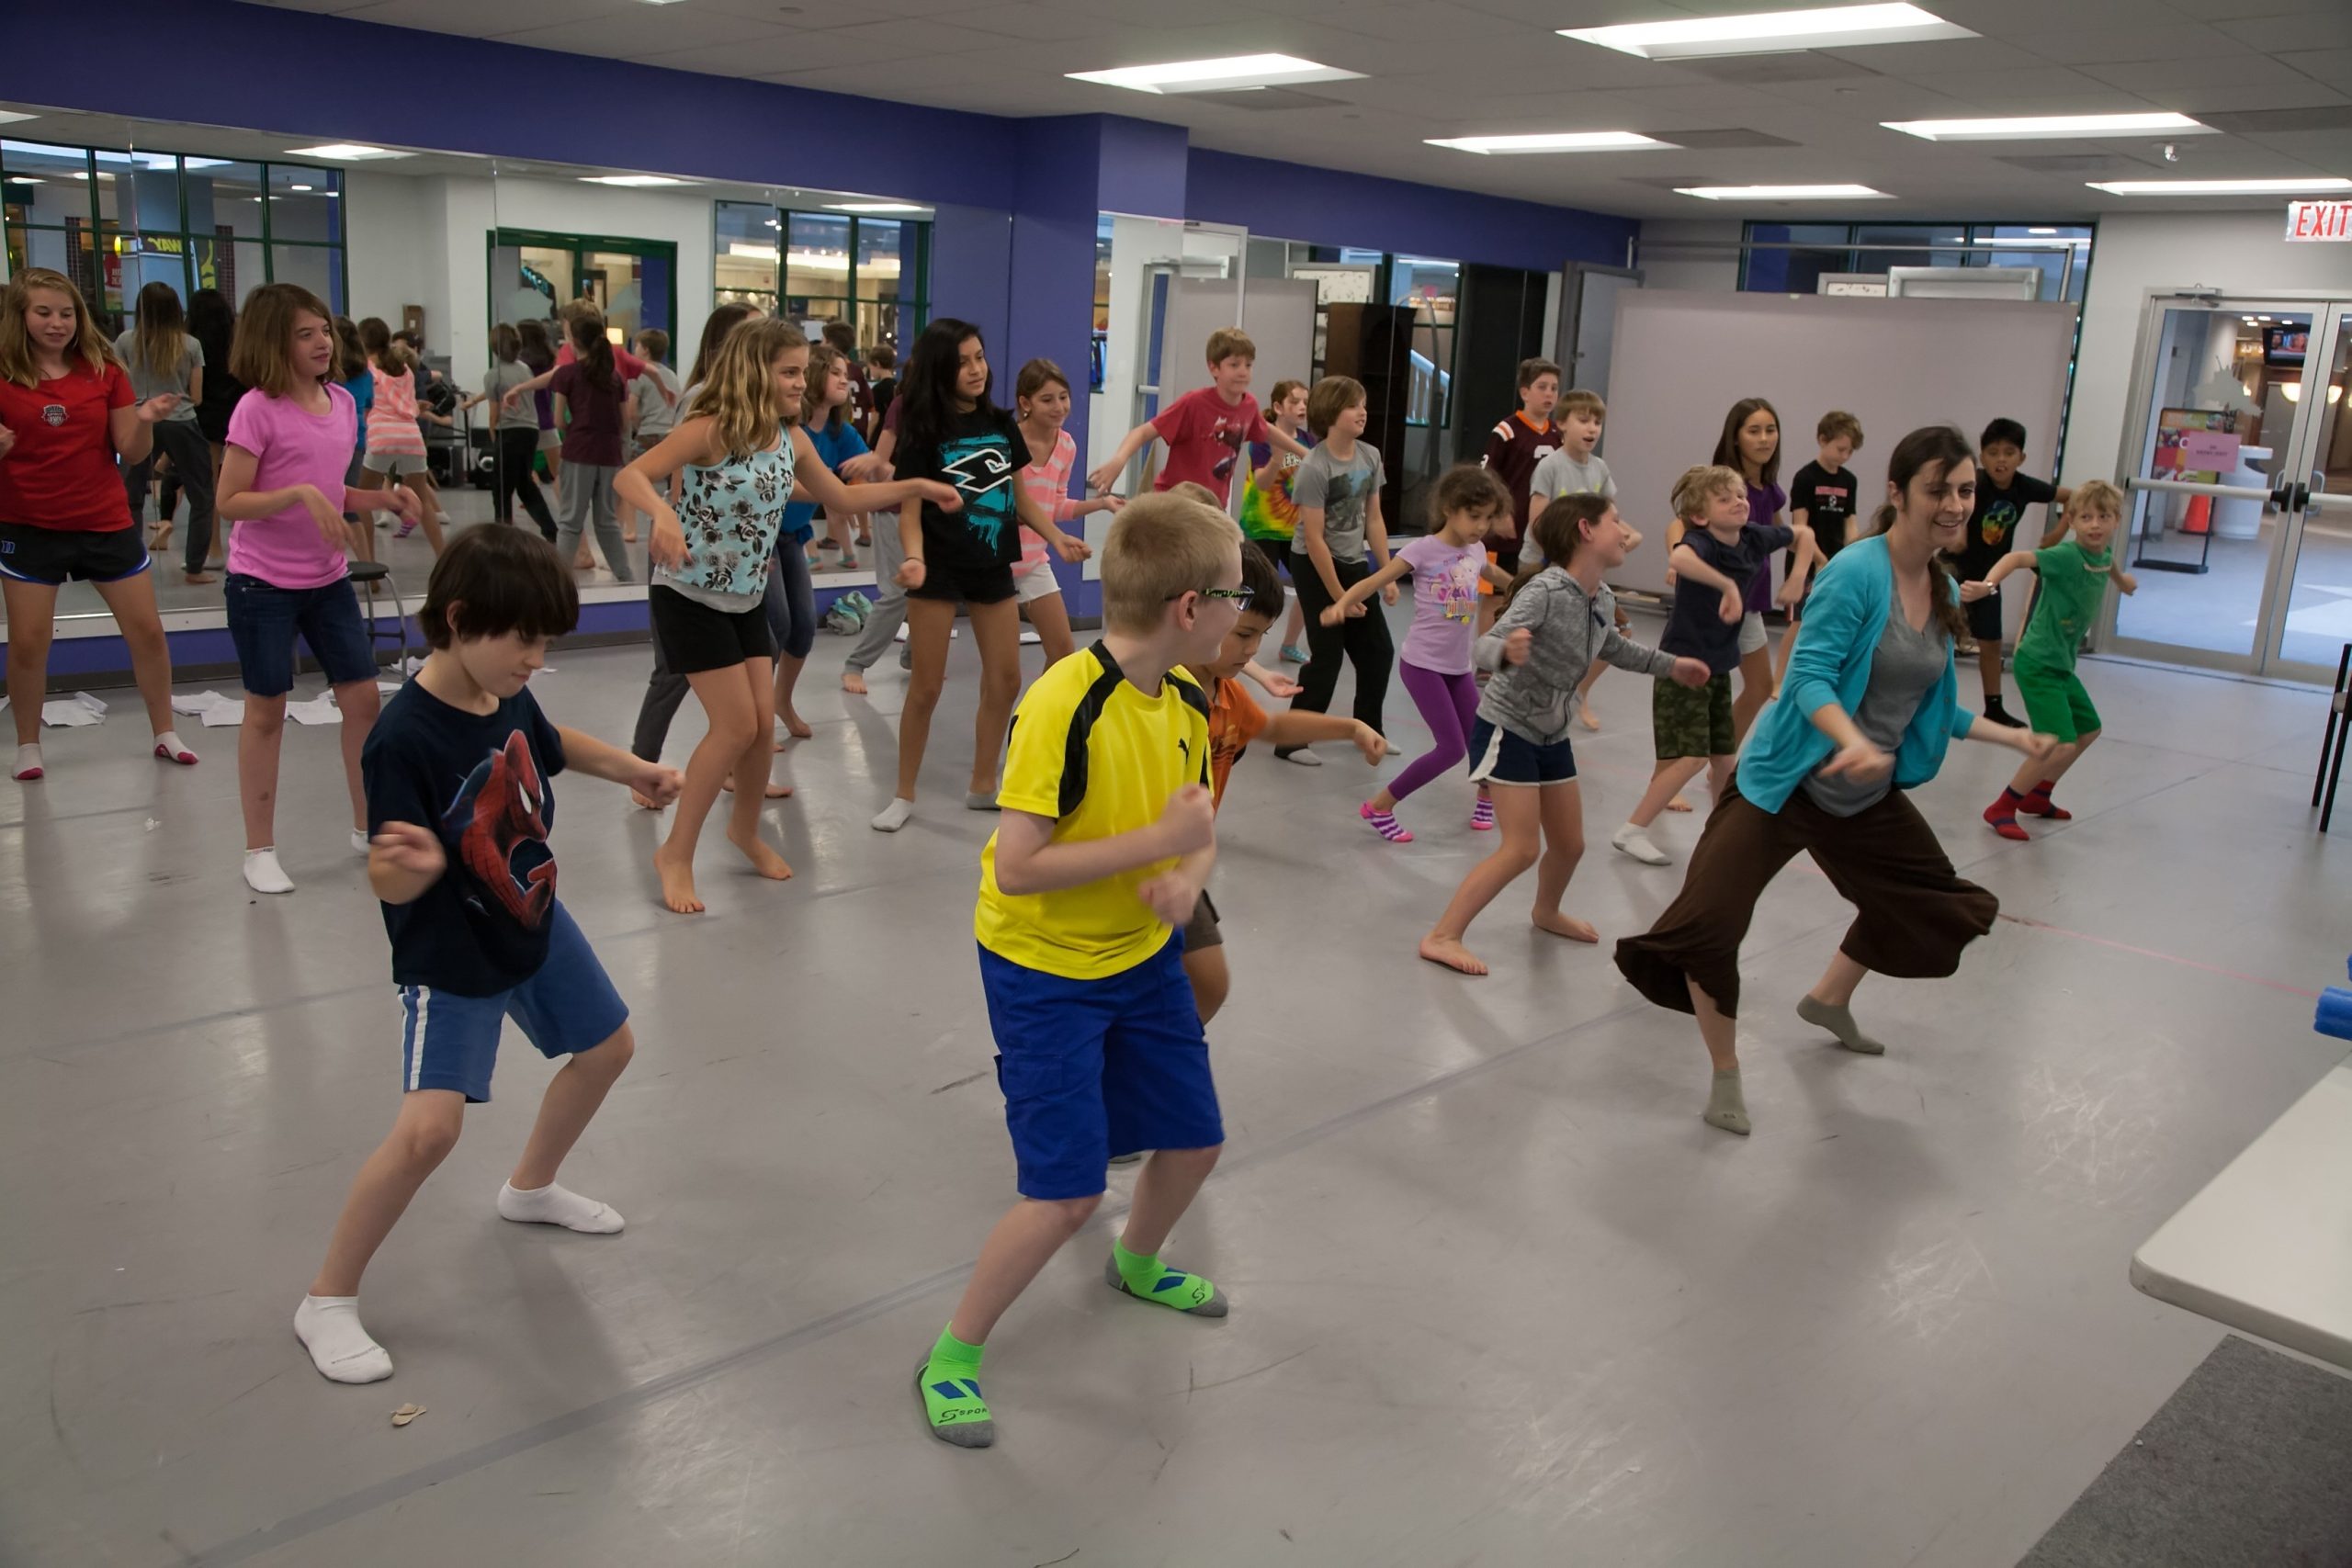 Synetic Theater's Summer Camps